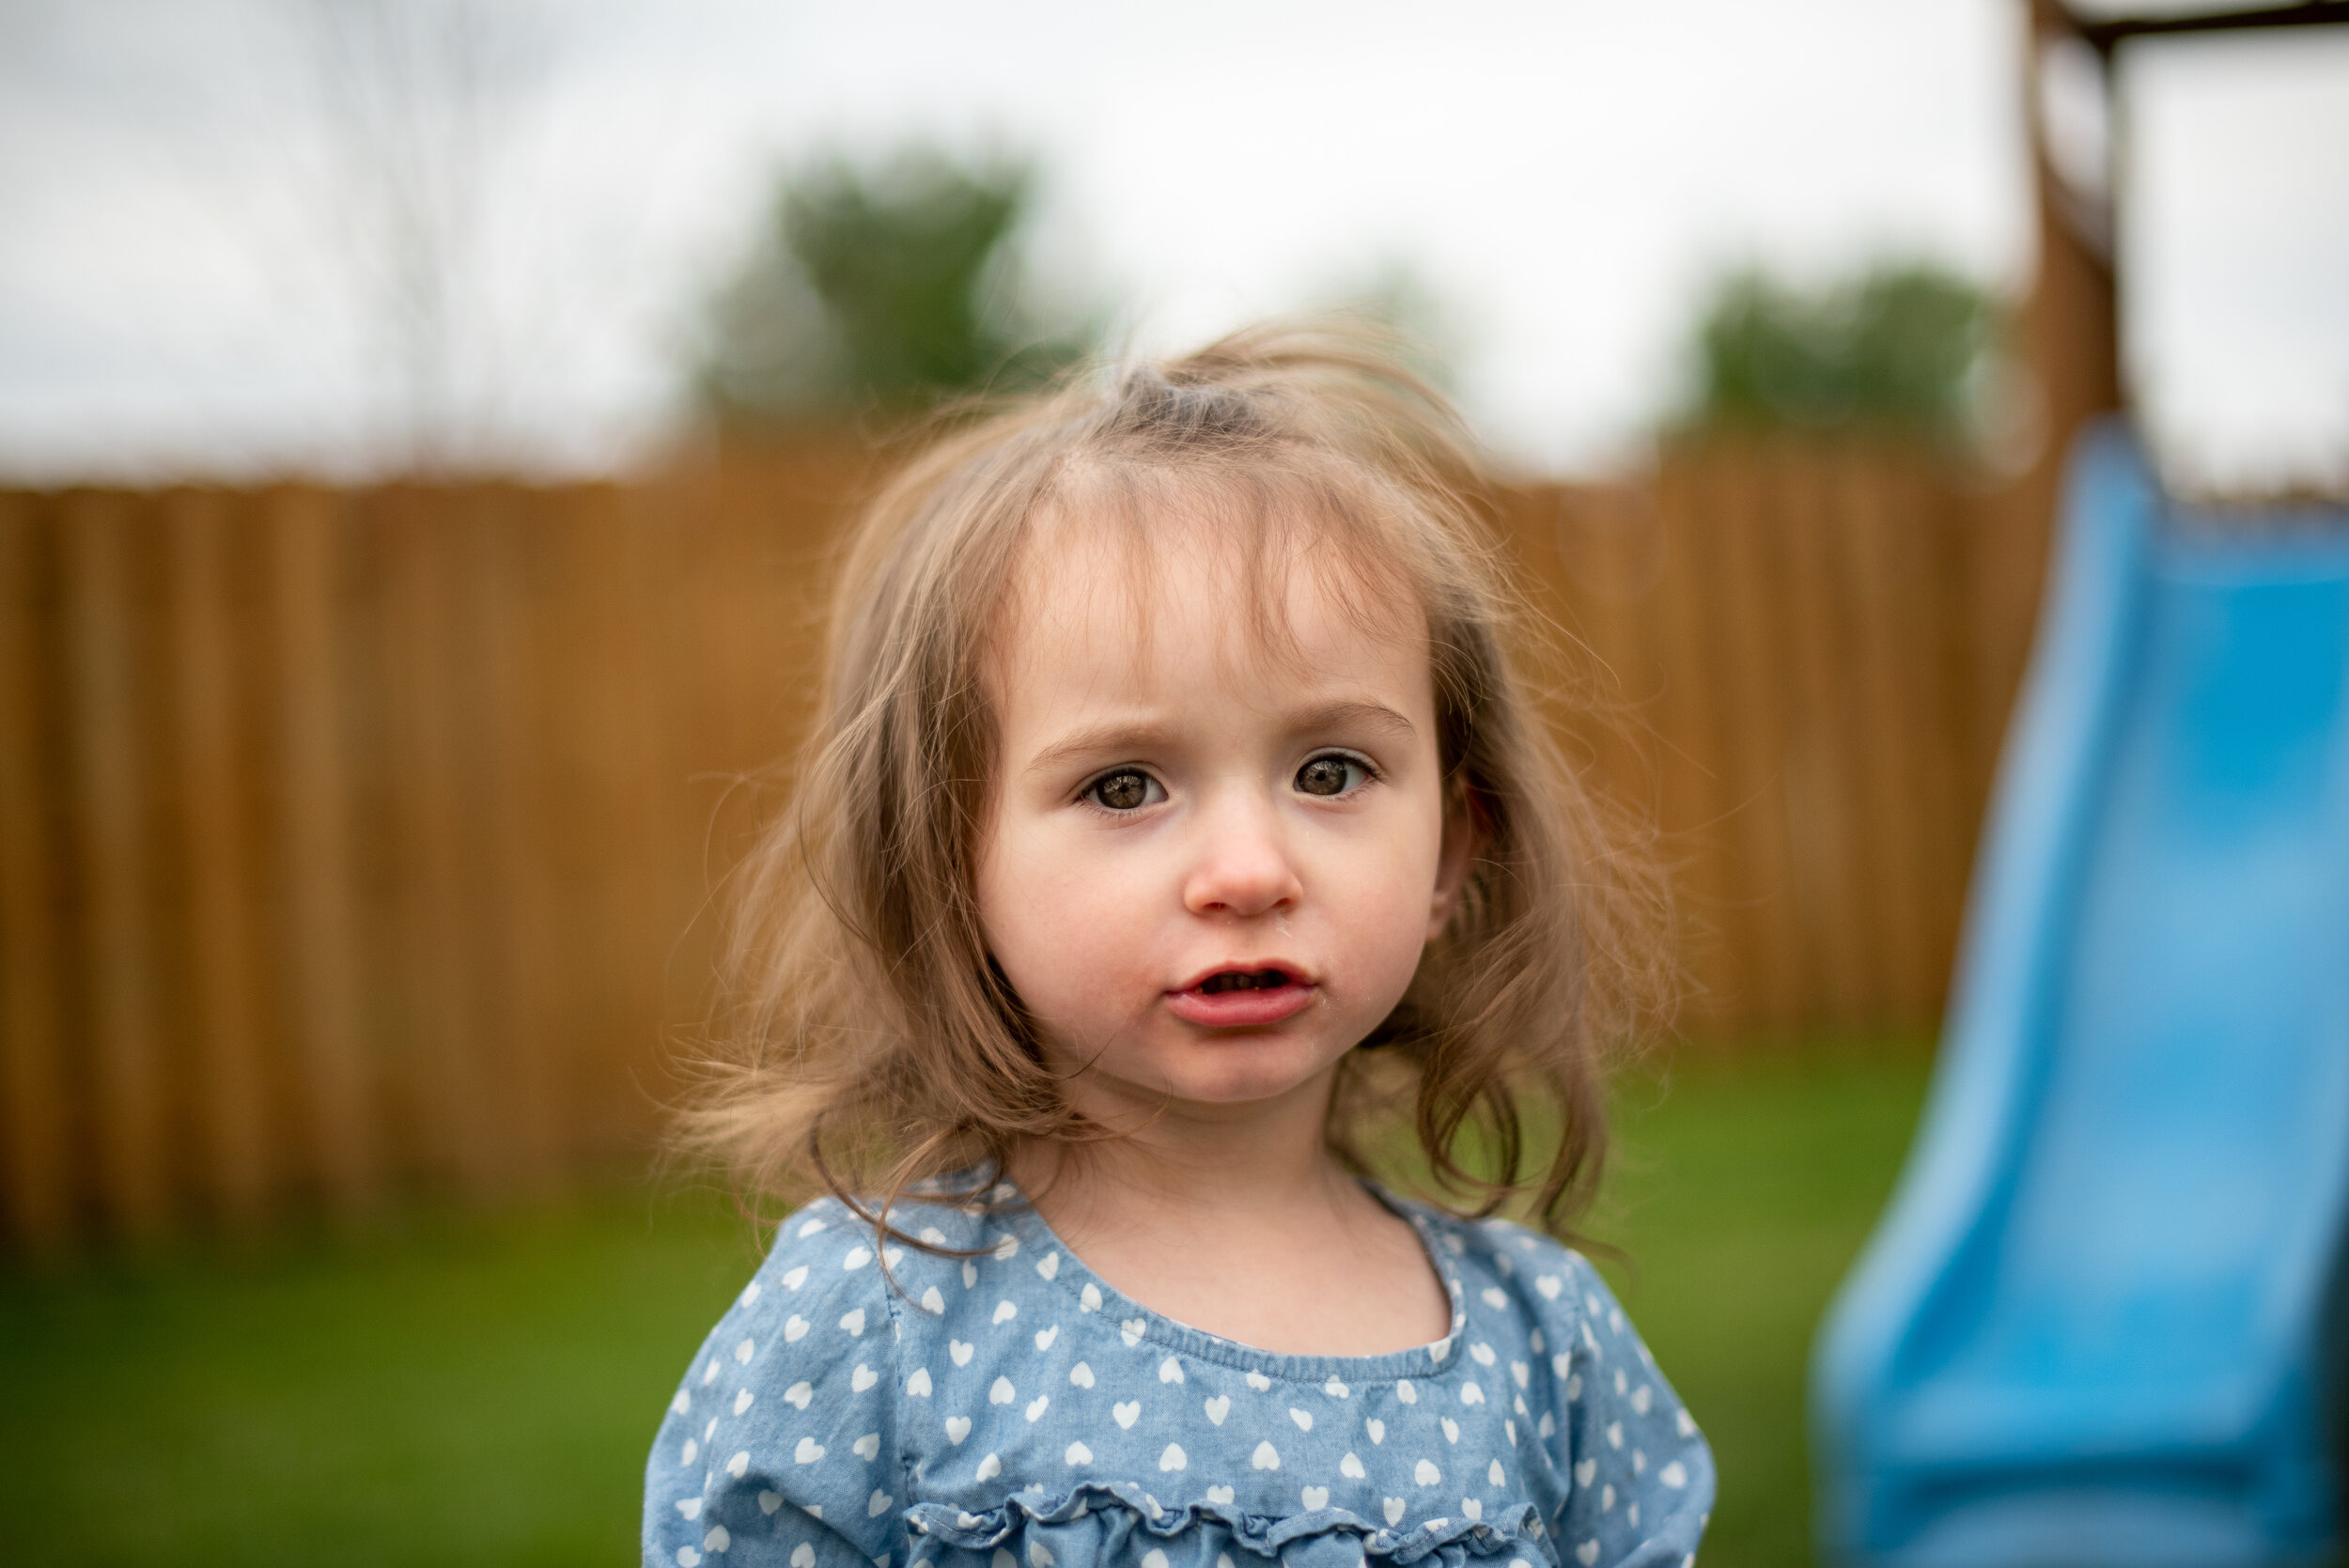 little girl outside in polka dot dress and messy hair looking at camera